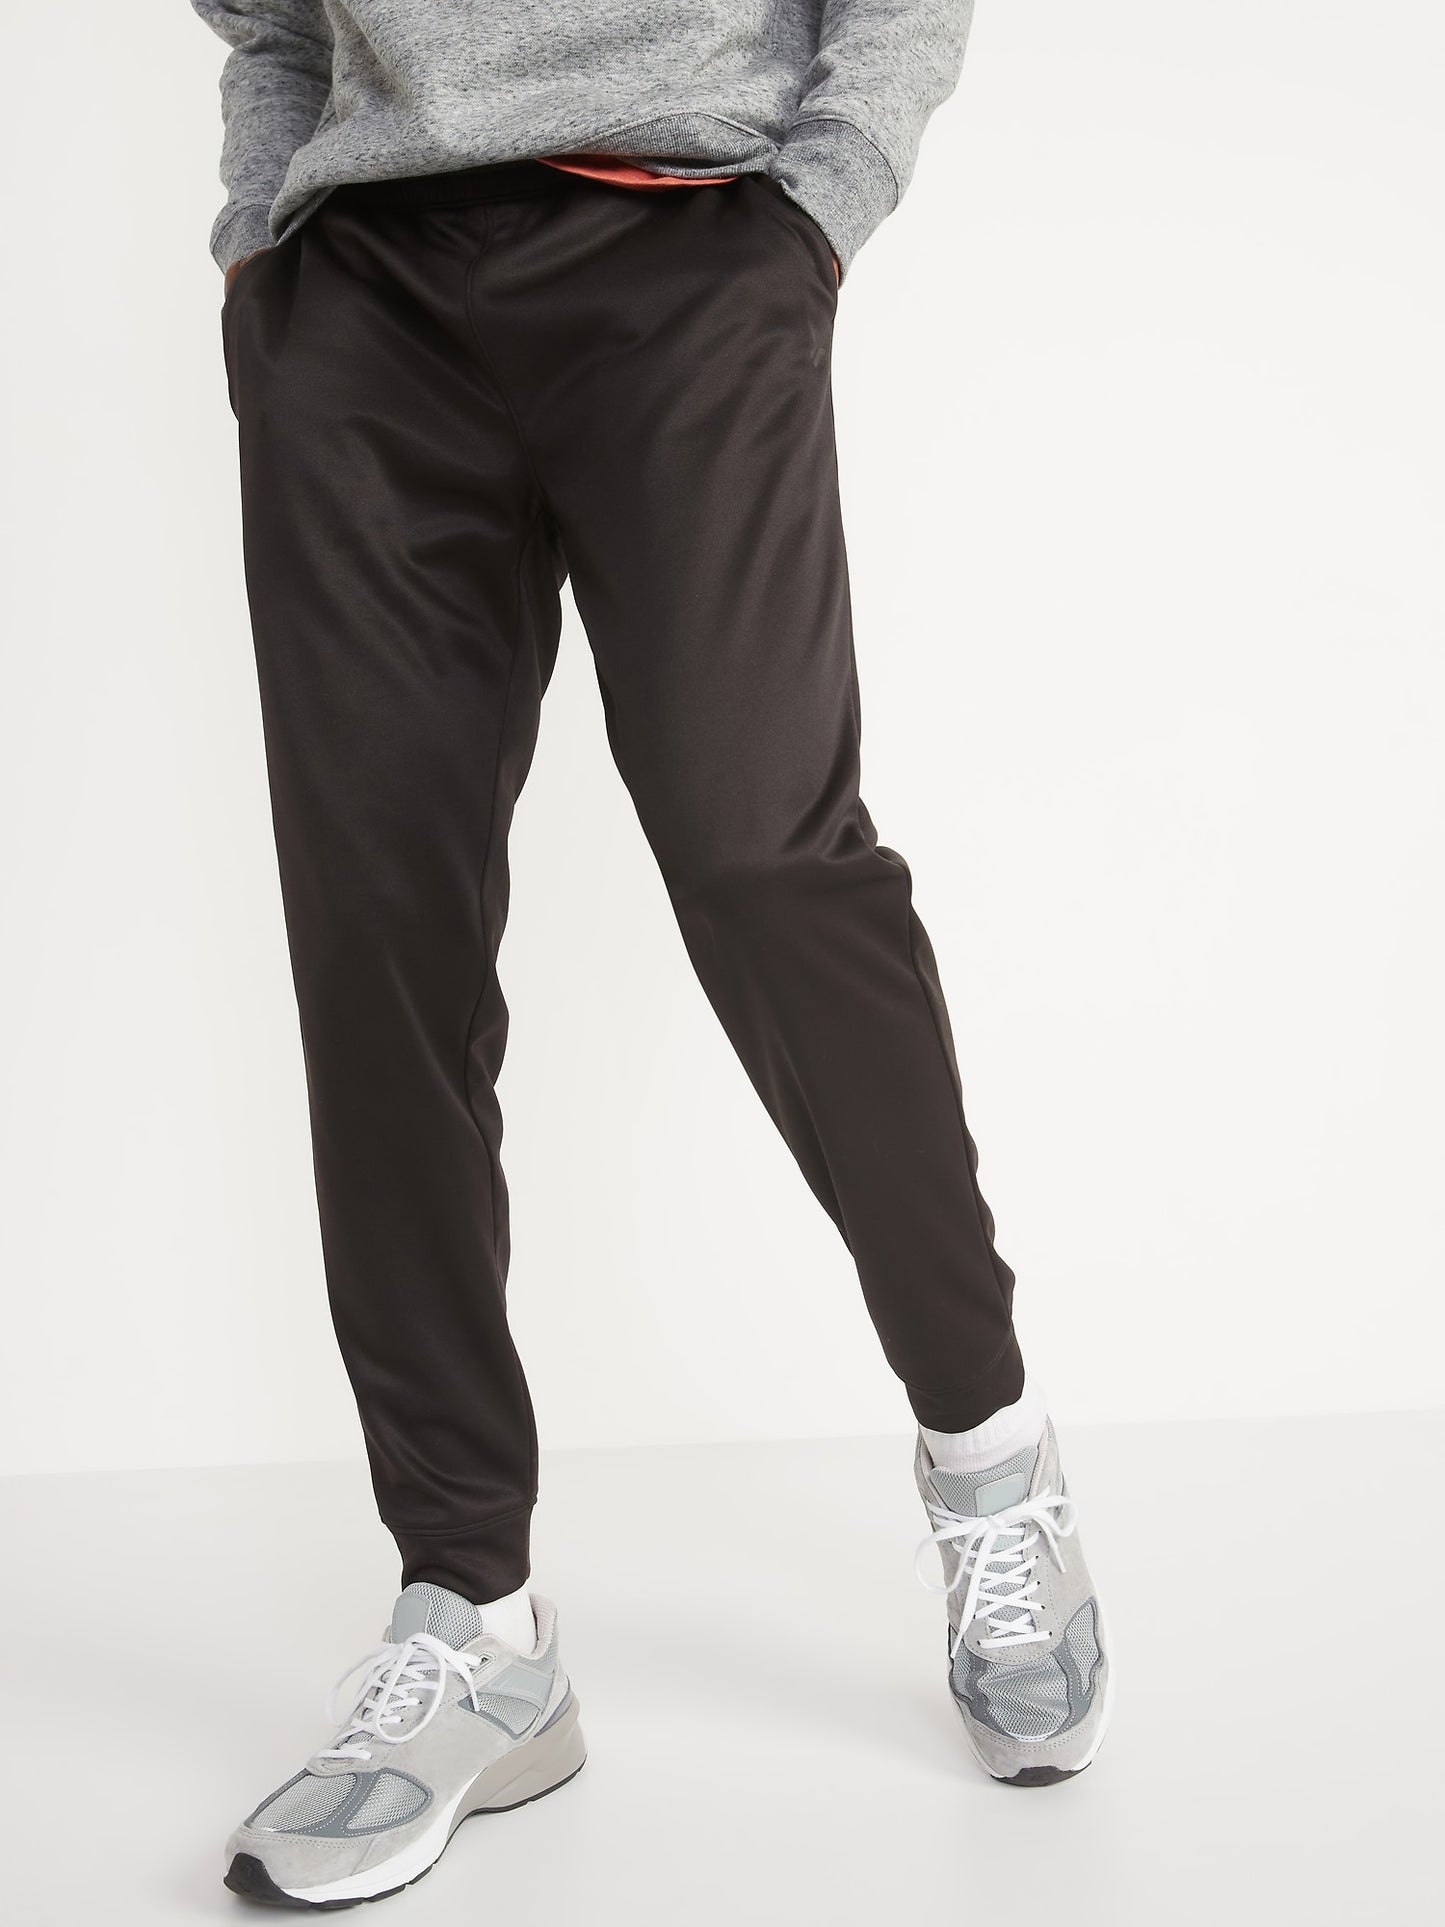 Old Navy Go-Dry Performance Jogger Sweatpants for Men